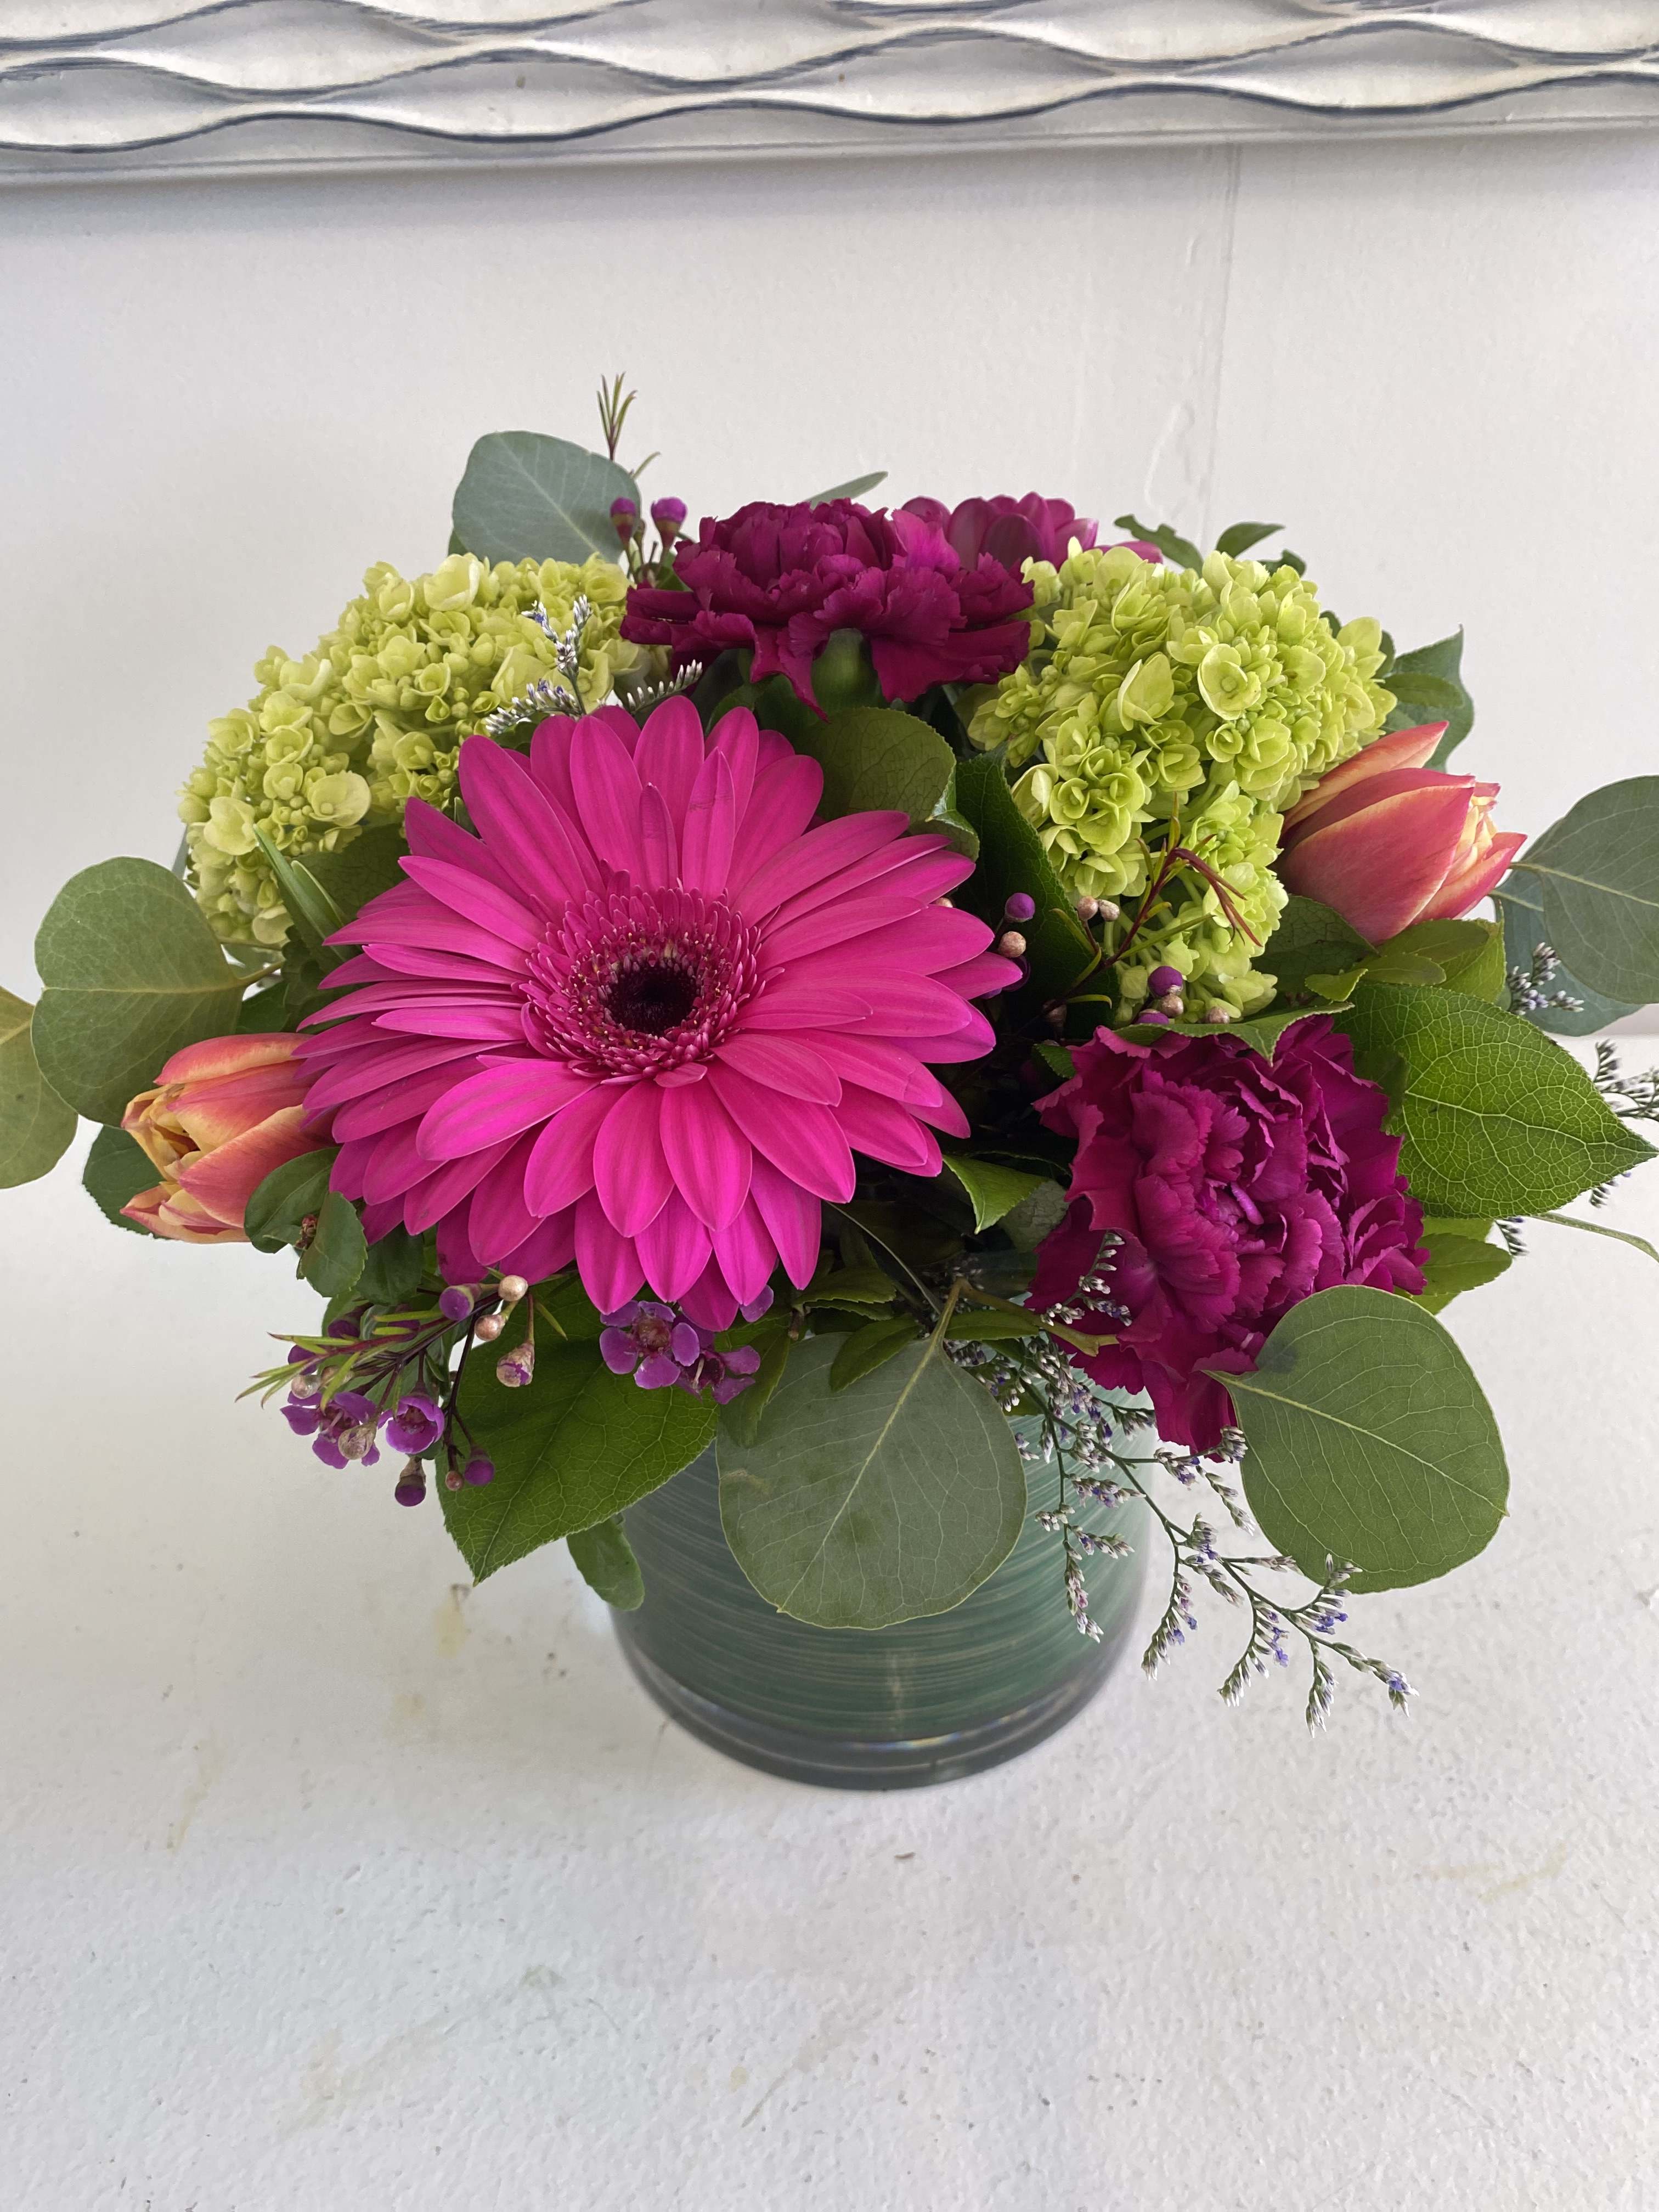 Mini Spring Blush - An eye-catching blend of fuschia, green, and purple blooms arranged into a glass vase with fresh mixed greenery.